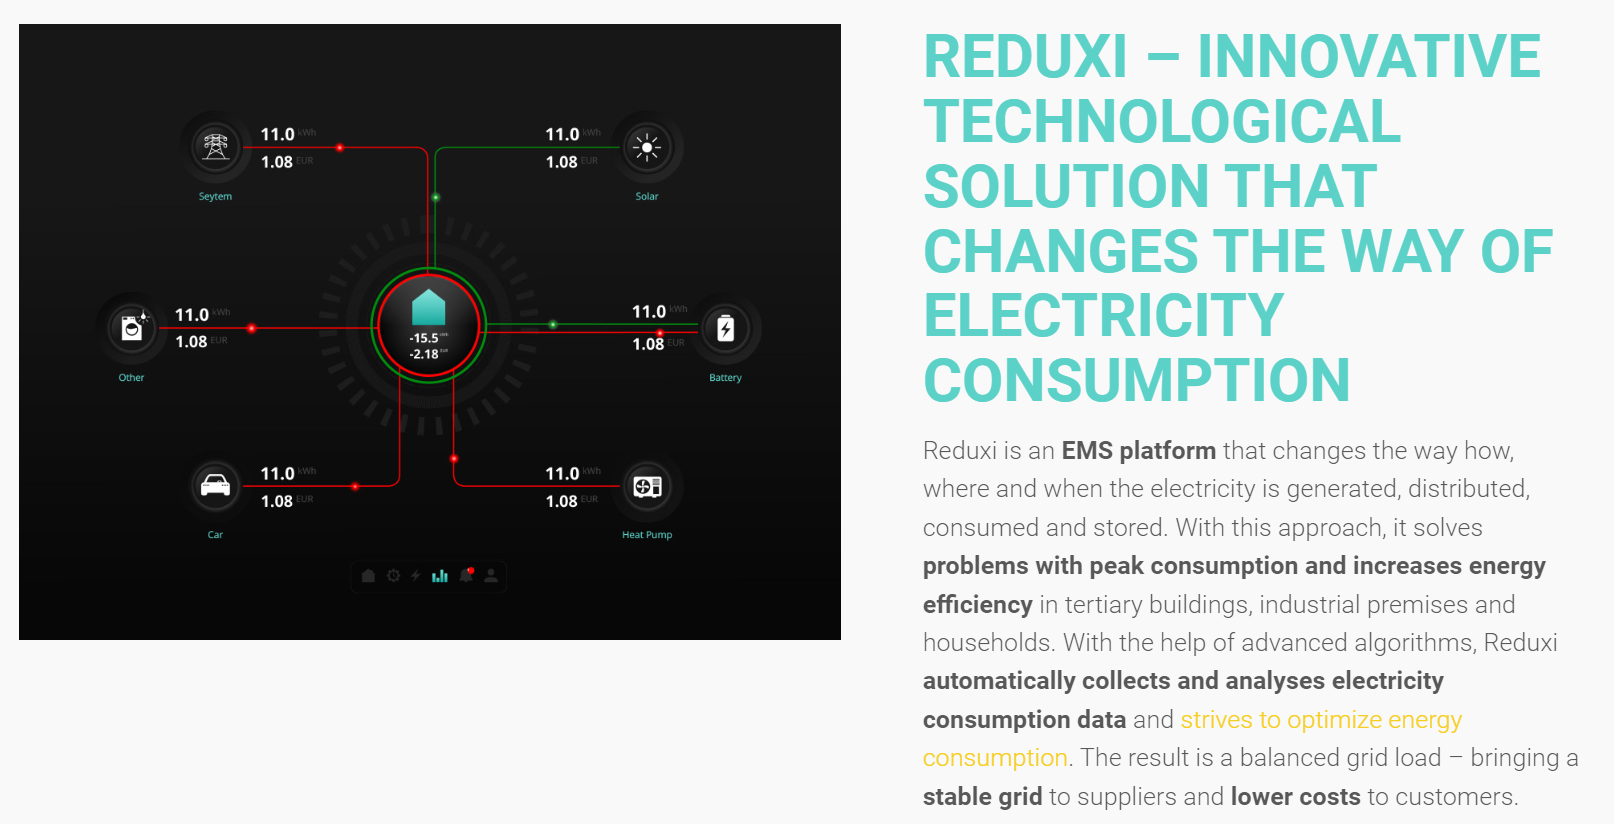 Reduxi – innovative technological solution that changes the way of electricity consumption